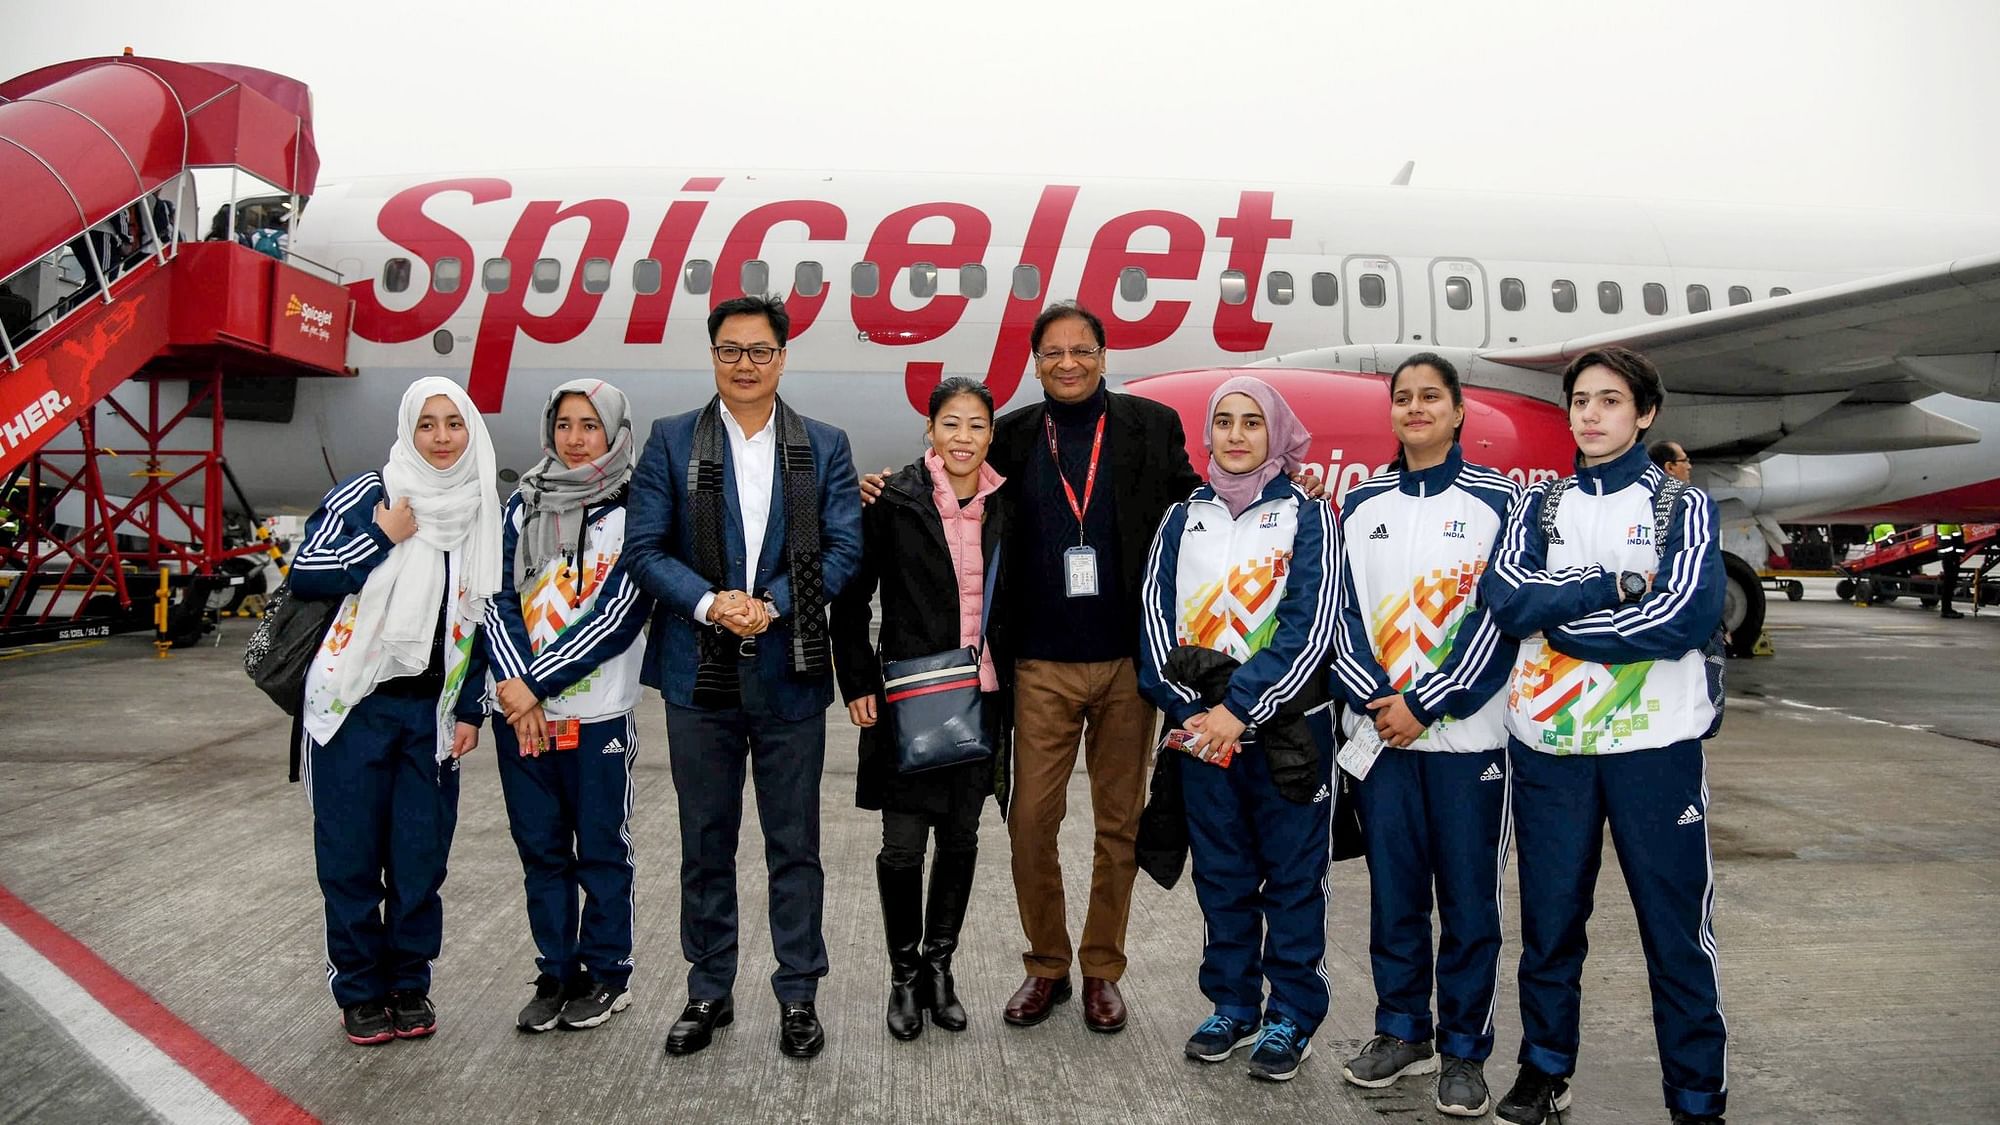 At the send-off ceremony of the athletes at the Indira Gandhi International Airport on Wednesday, Sports Minister Kiren Rijiju was present along with London Olympic bronze medallist Mary Kom.